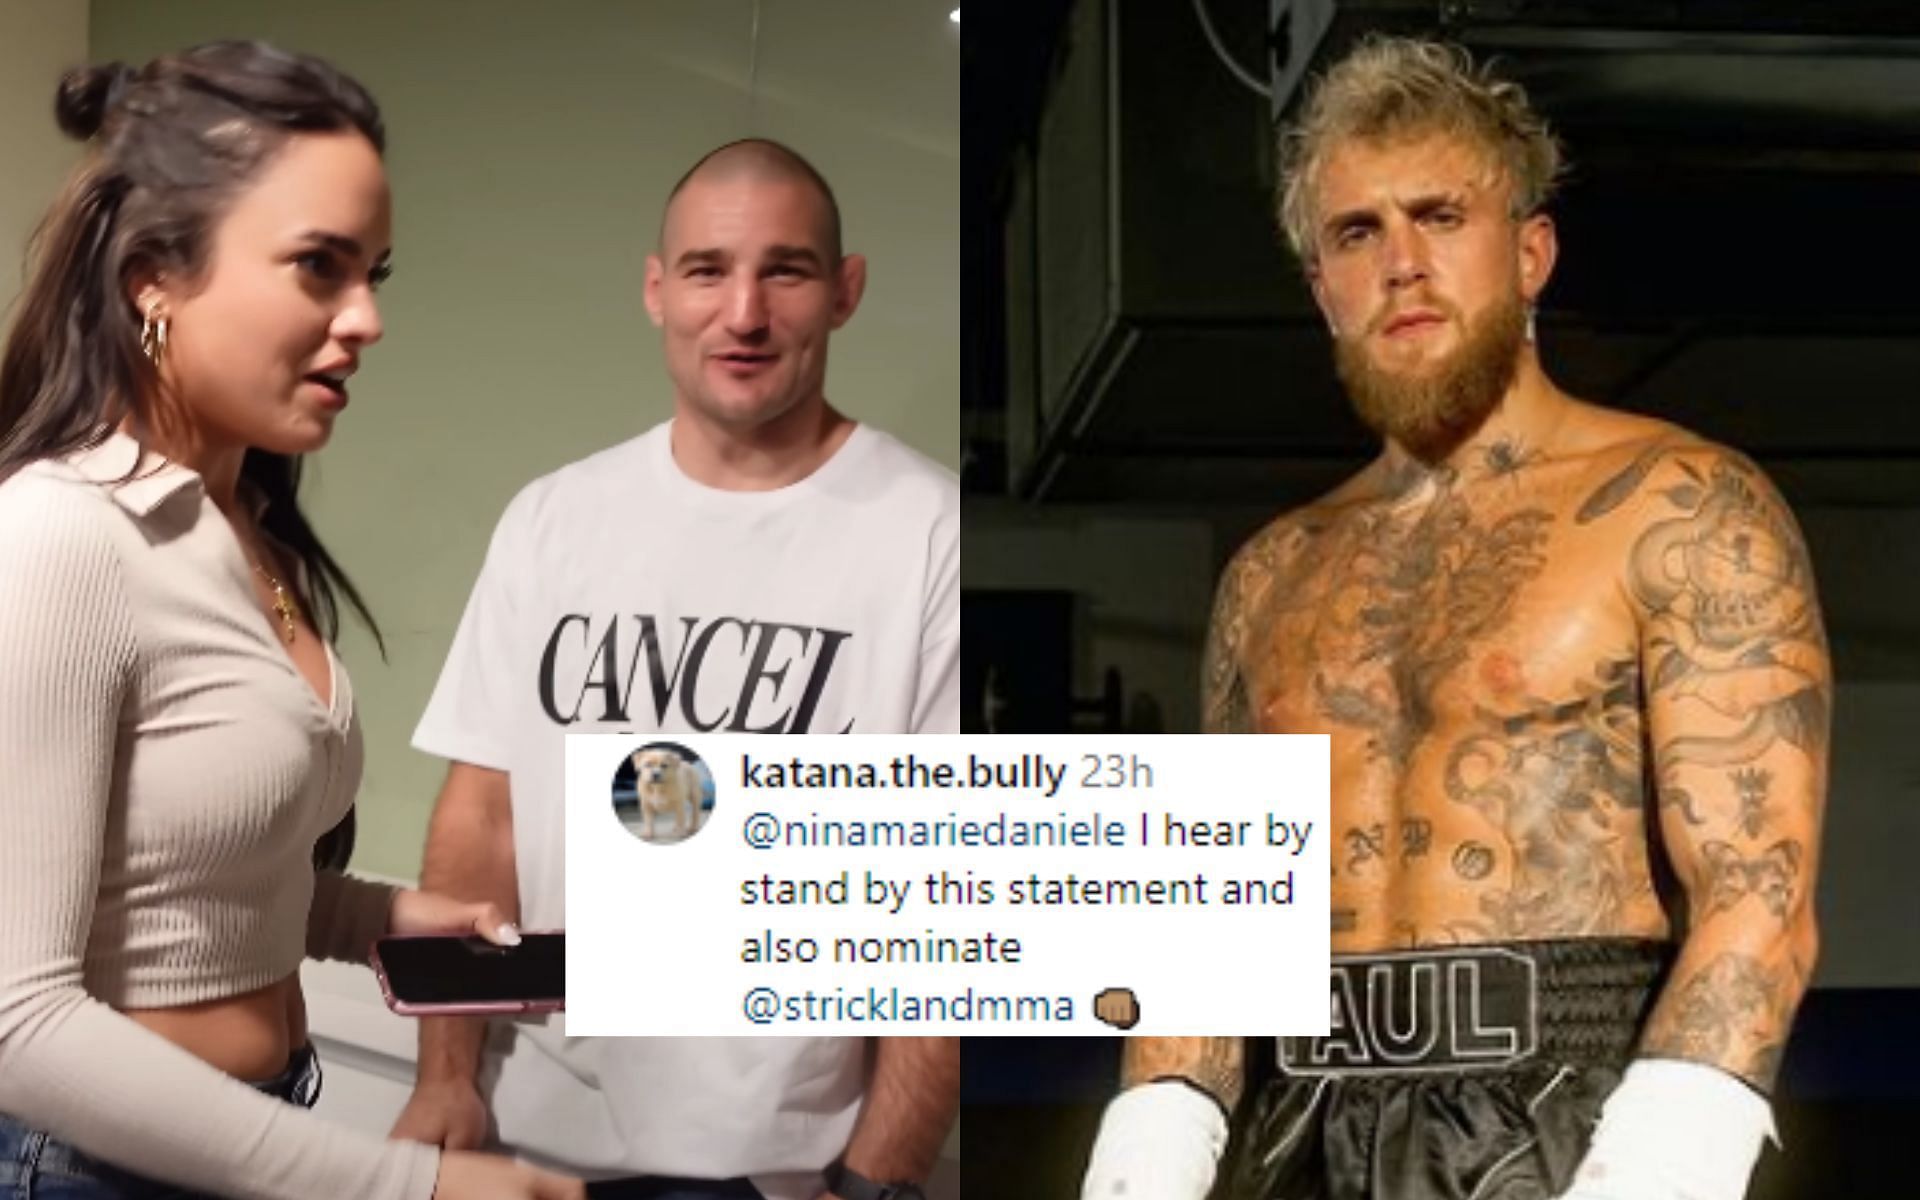 Fans react after Nina-Marie Daniele suggested Sean Strickland avenge Jake Paul